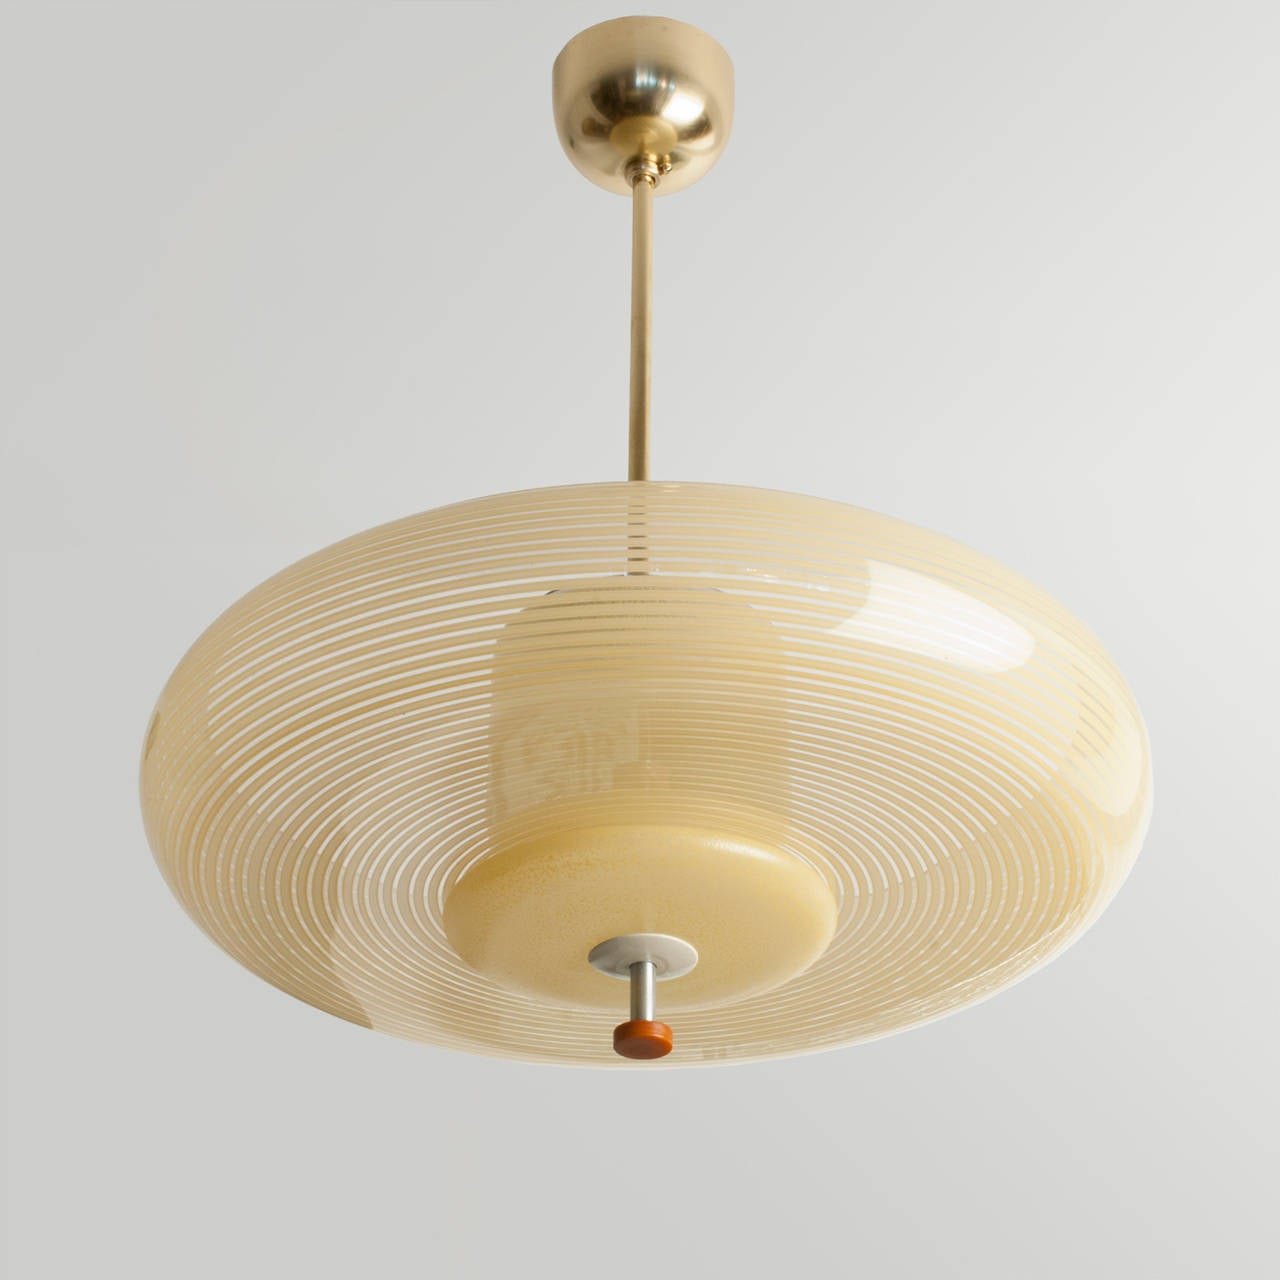 Swedish art deco pendant with clear and yellow striped glass with newly polished and lacquered brass stem and canopy. The finial consist of a polished and lacquered metal pieces and and orange bakelite disk. The lamp has been rewired and has a